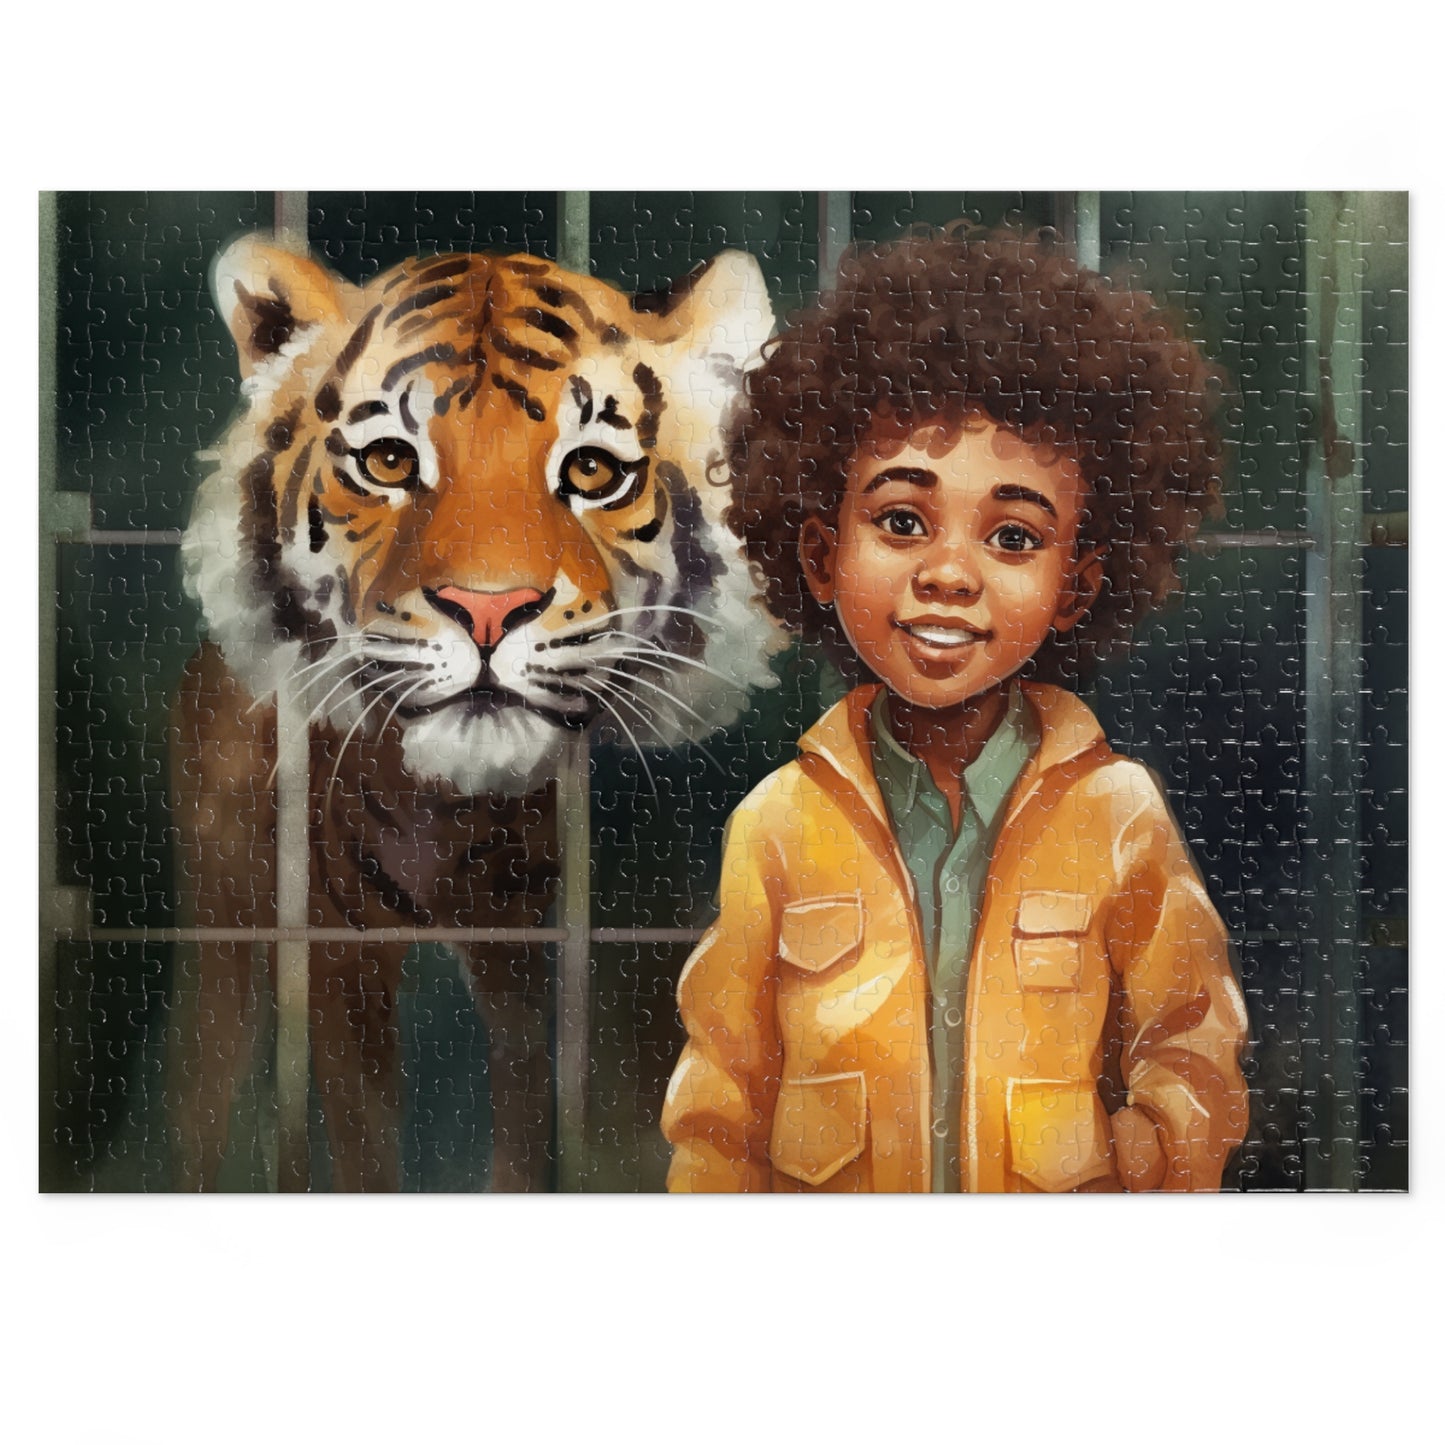 Eight-Year-Old Avery the Adventurous Zookeeper - Puzzle